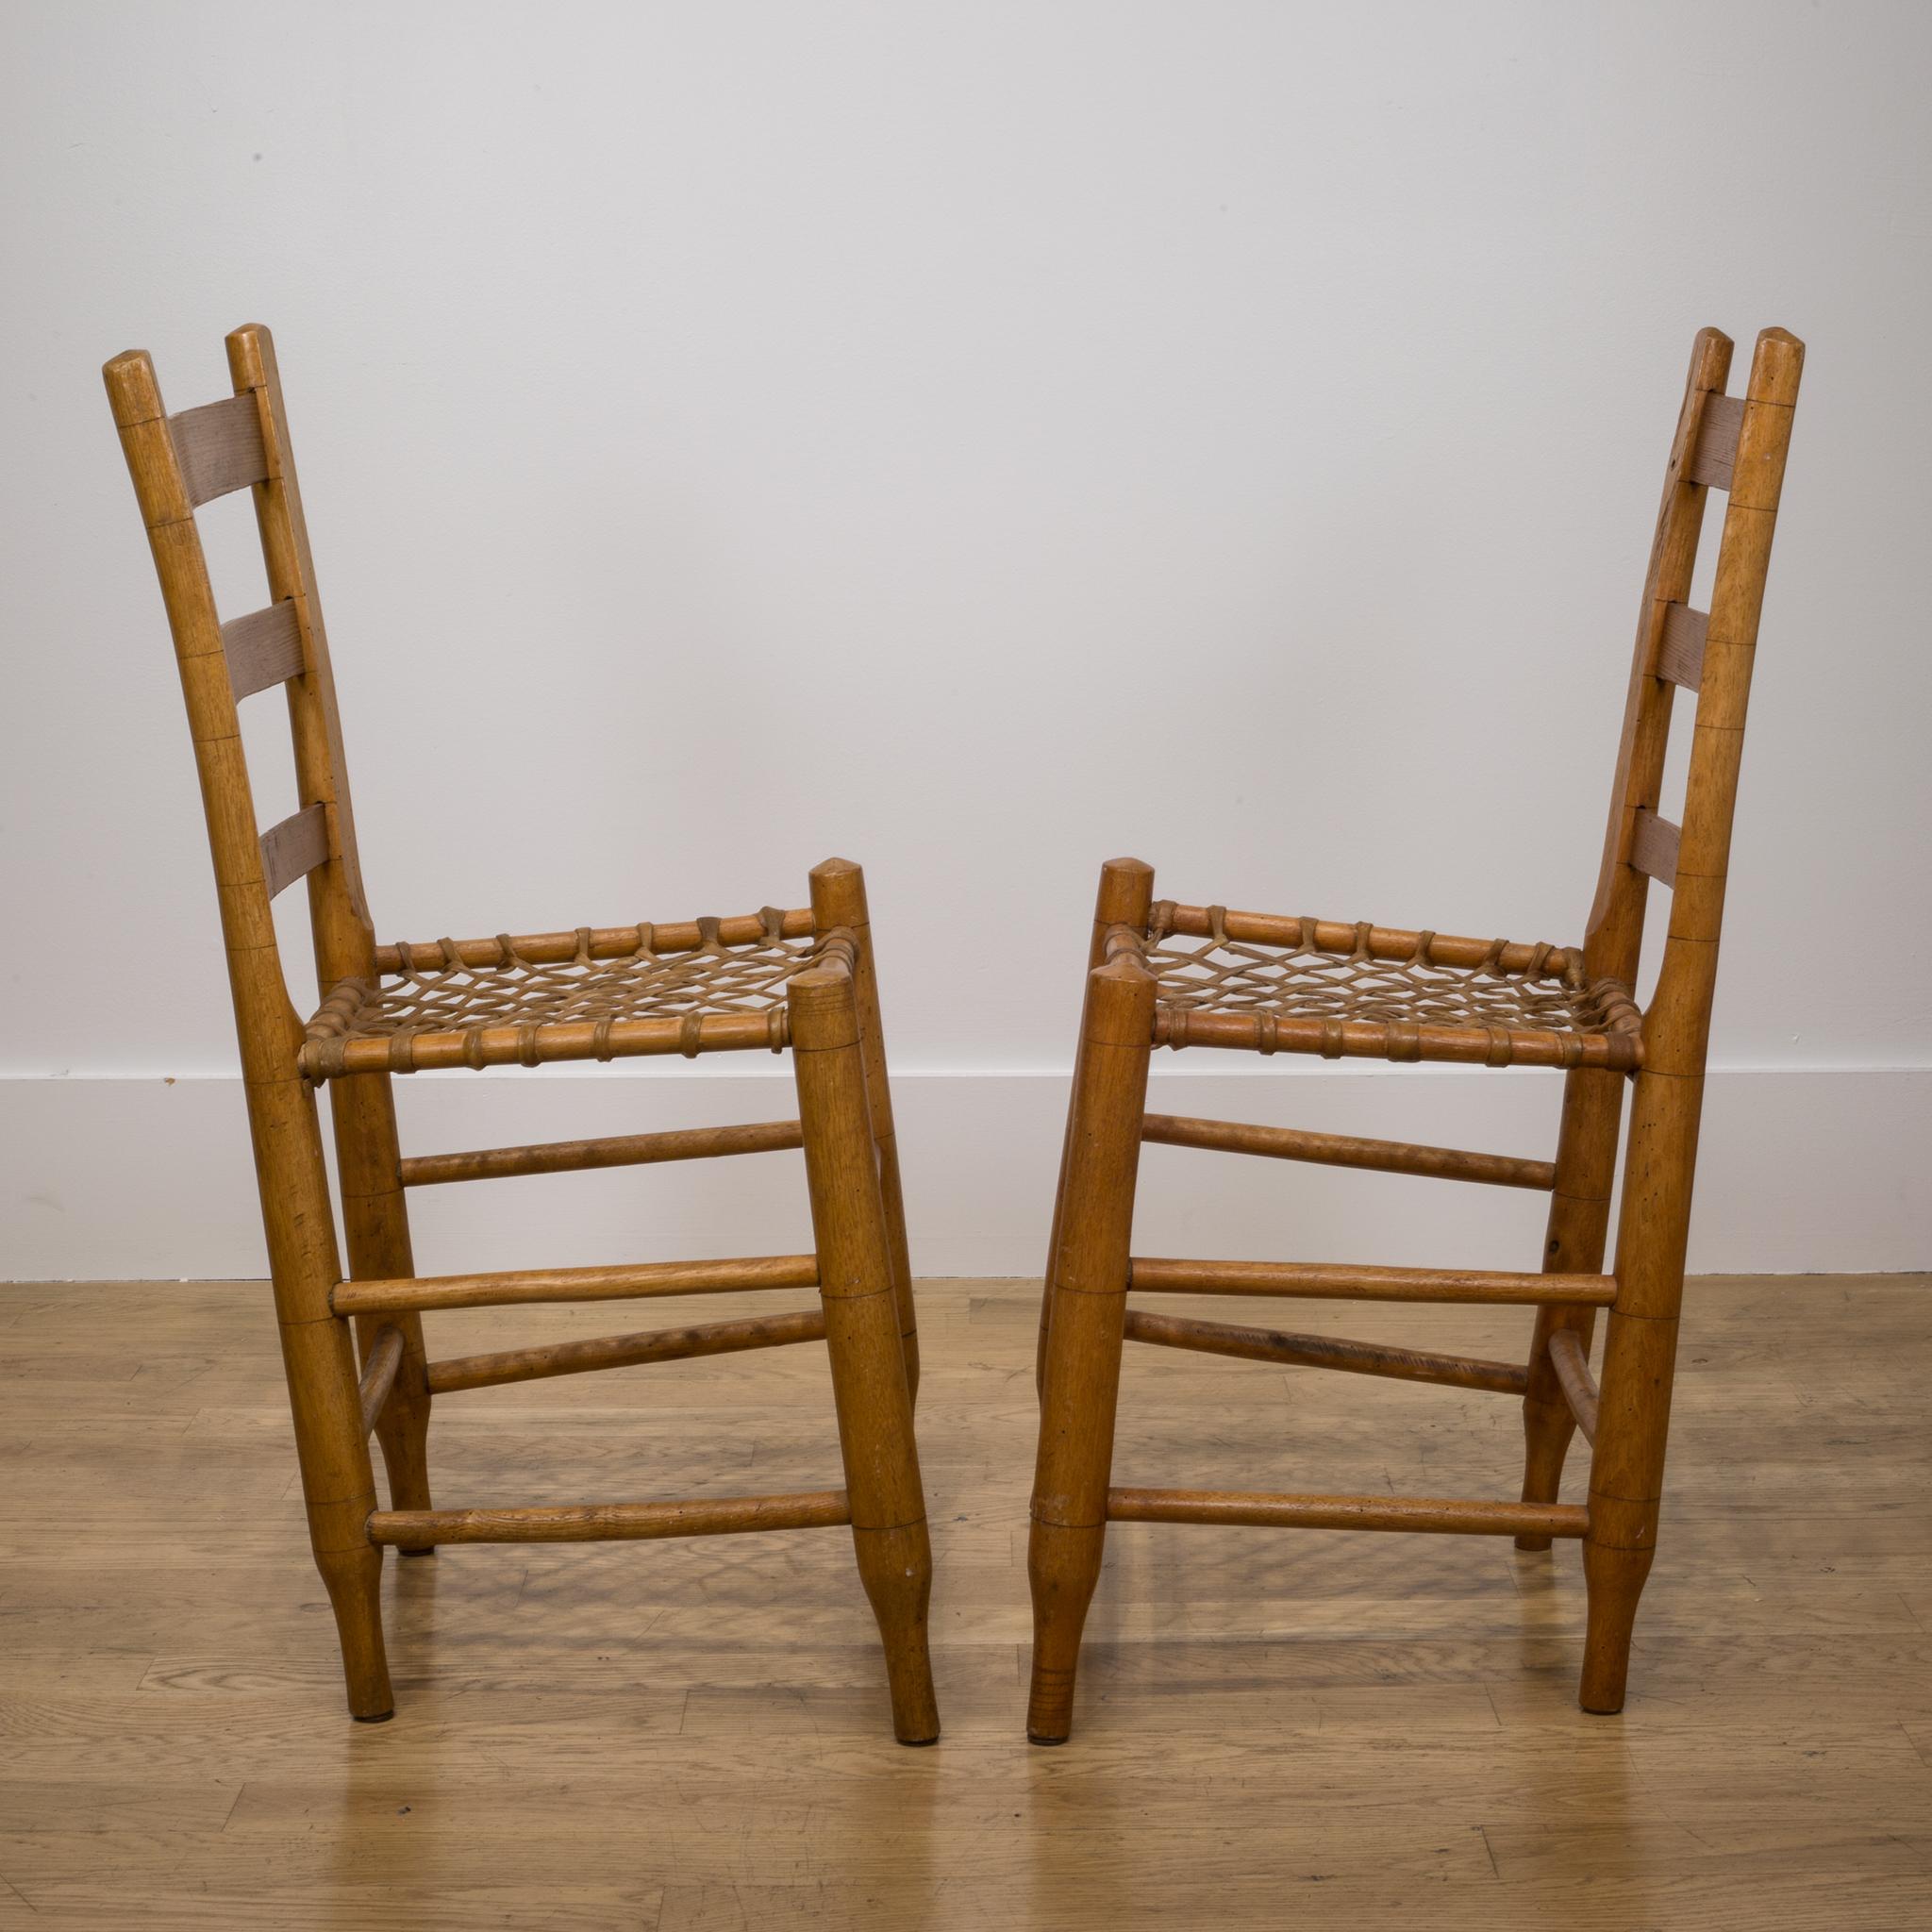 19th c. Handmade Wood/Rawhide Chairs from Historic  Oregon Commune c. 1856-1866 3